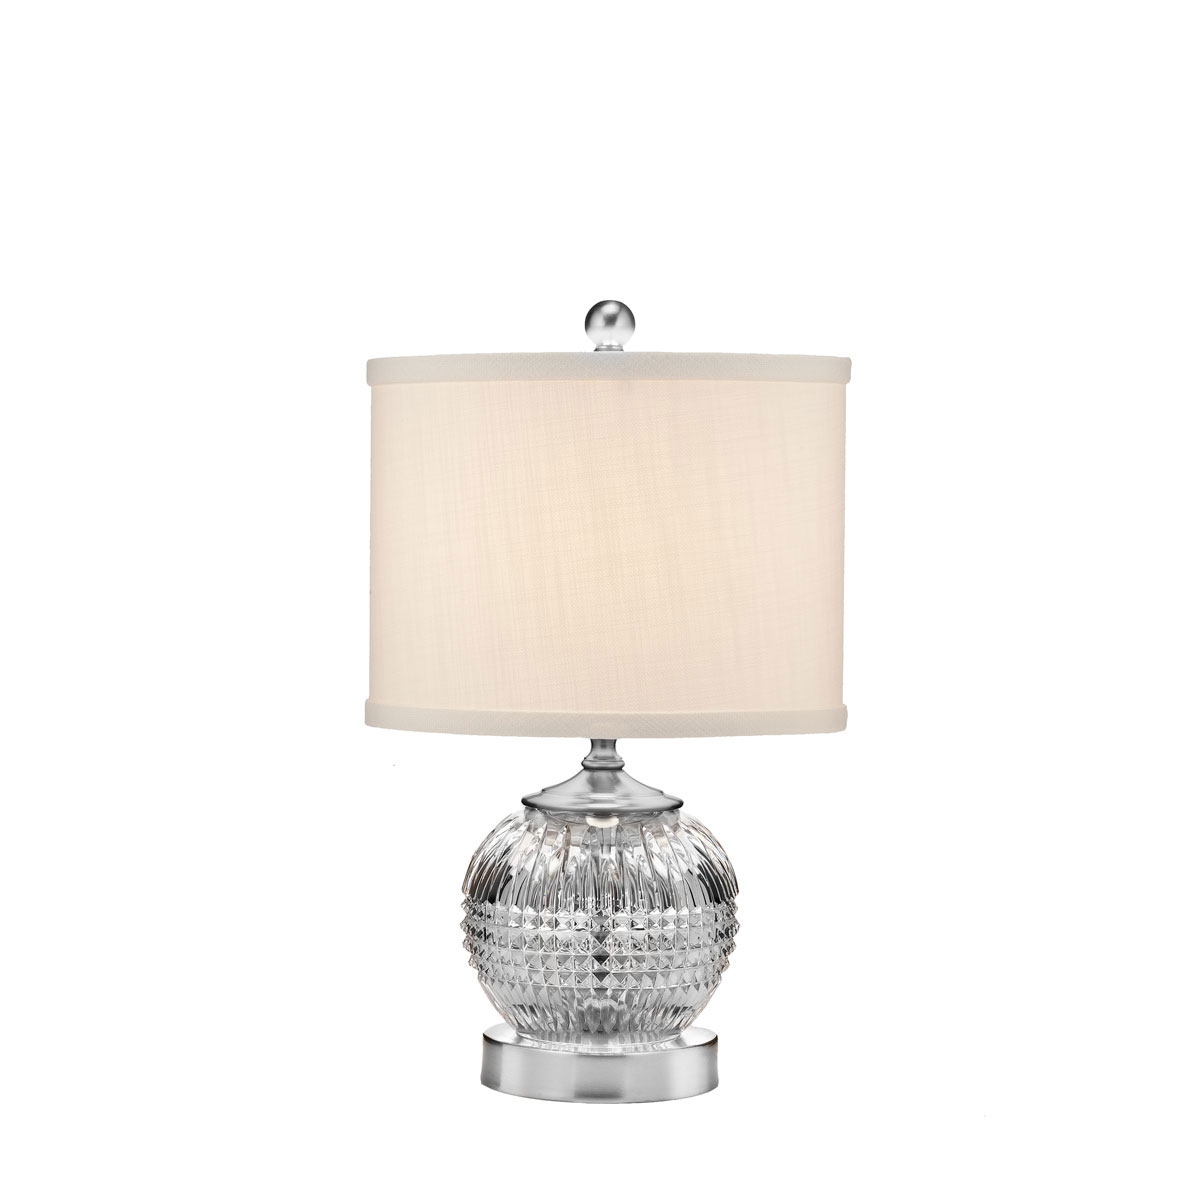 Waterford Crystal, Lismore Diamond 15" Accent Lamp